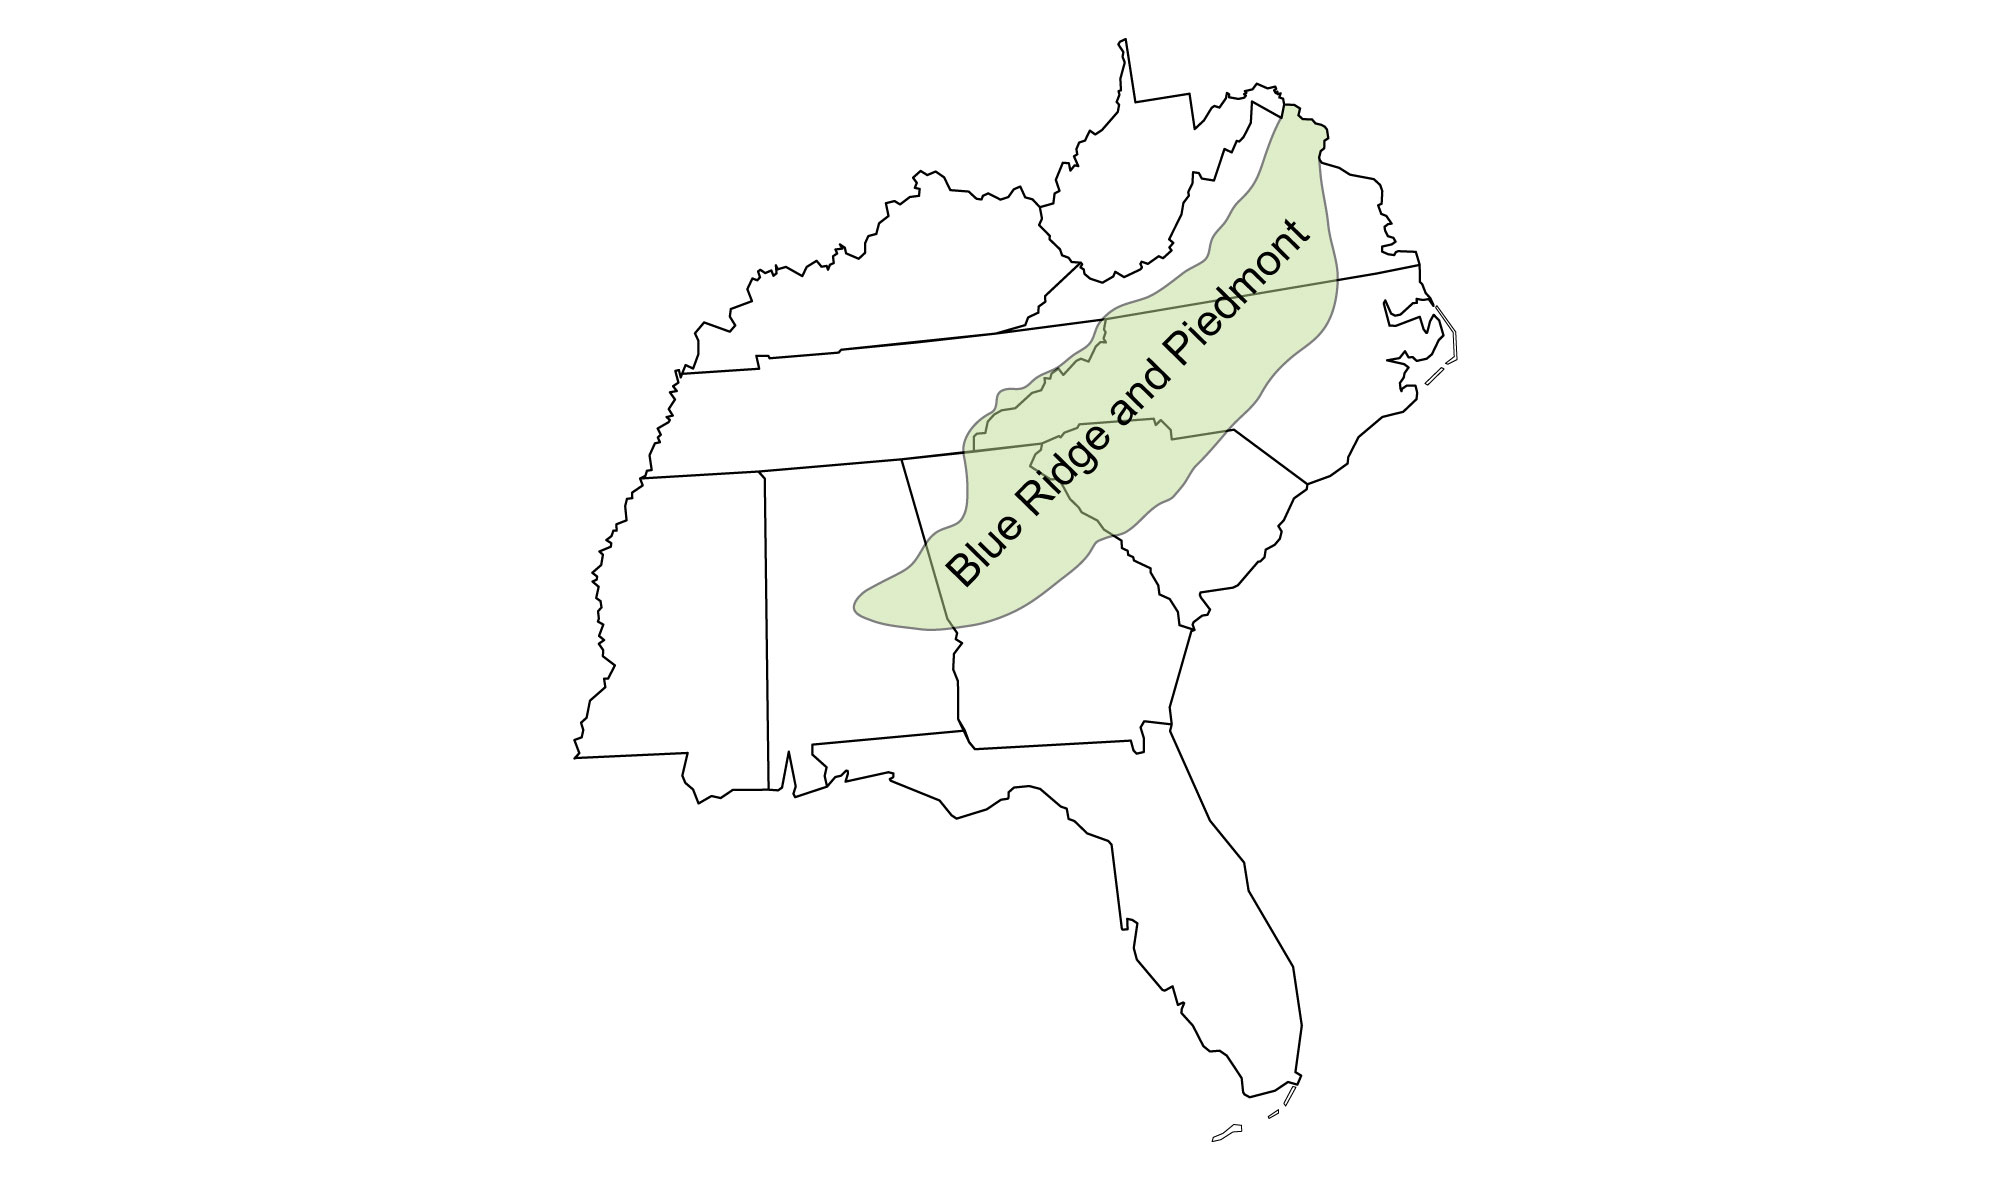 Simple map that shows the extent of the Blue Ridge and Piedmont region of the southeastern United States, which includes much of Virginia, North Carolina, and South Carolina, and portions of Georgia and Alabama.